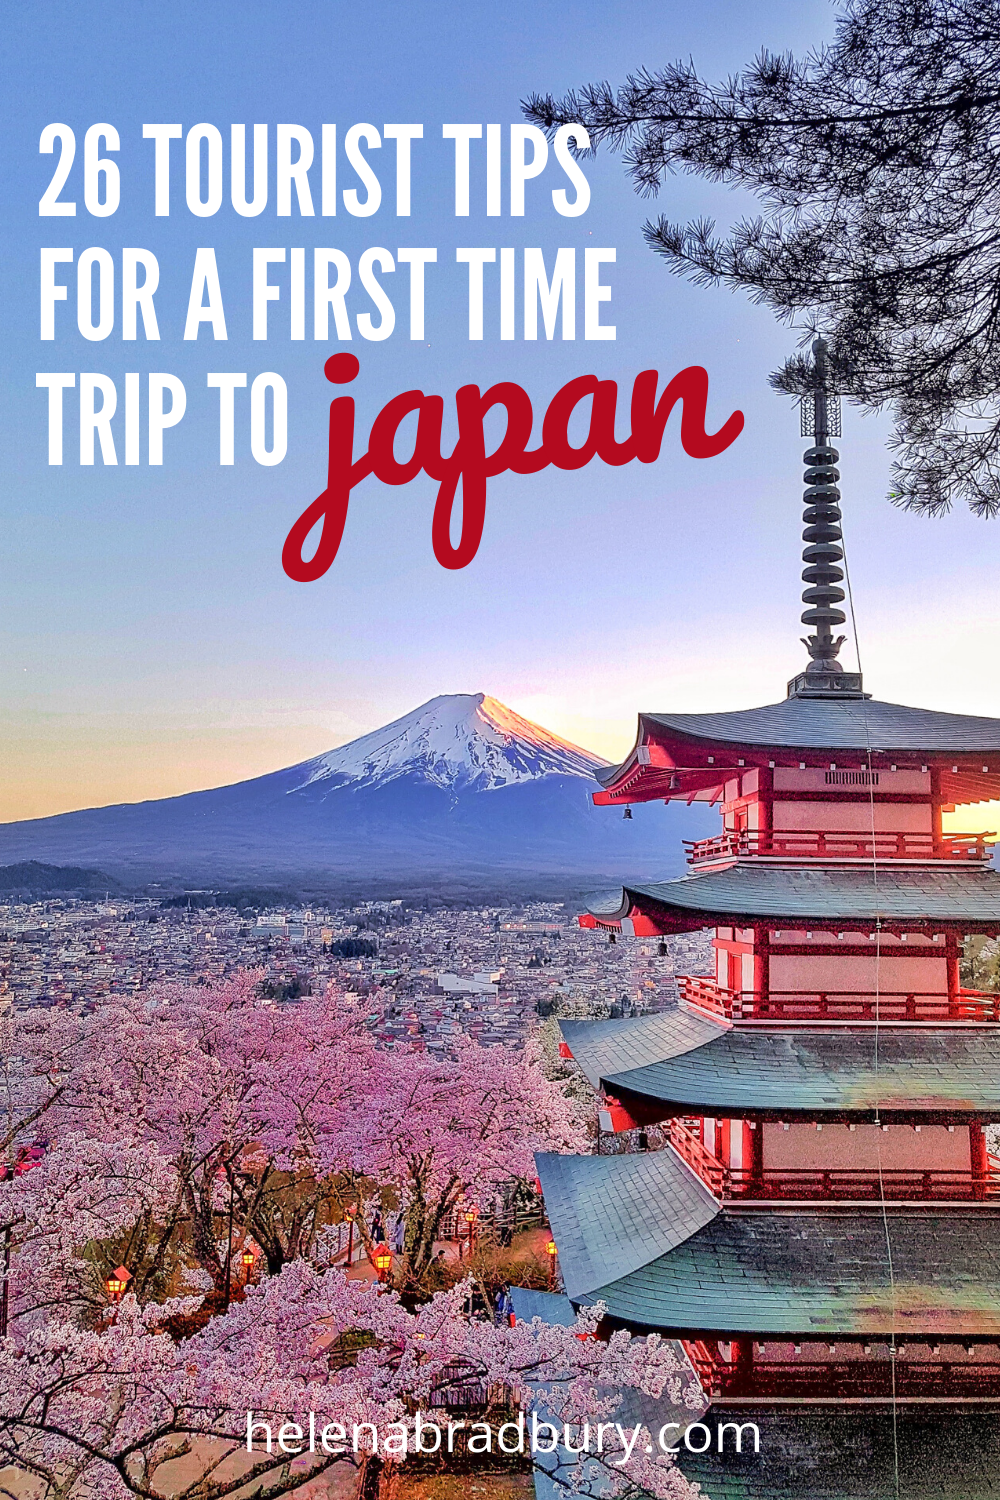 A pinnable image of Japan with text that says, " 26 tourist tips for a first time trip to Japan."